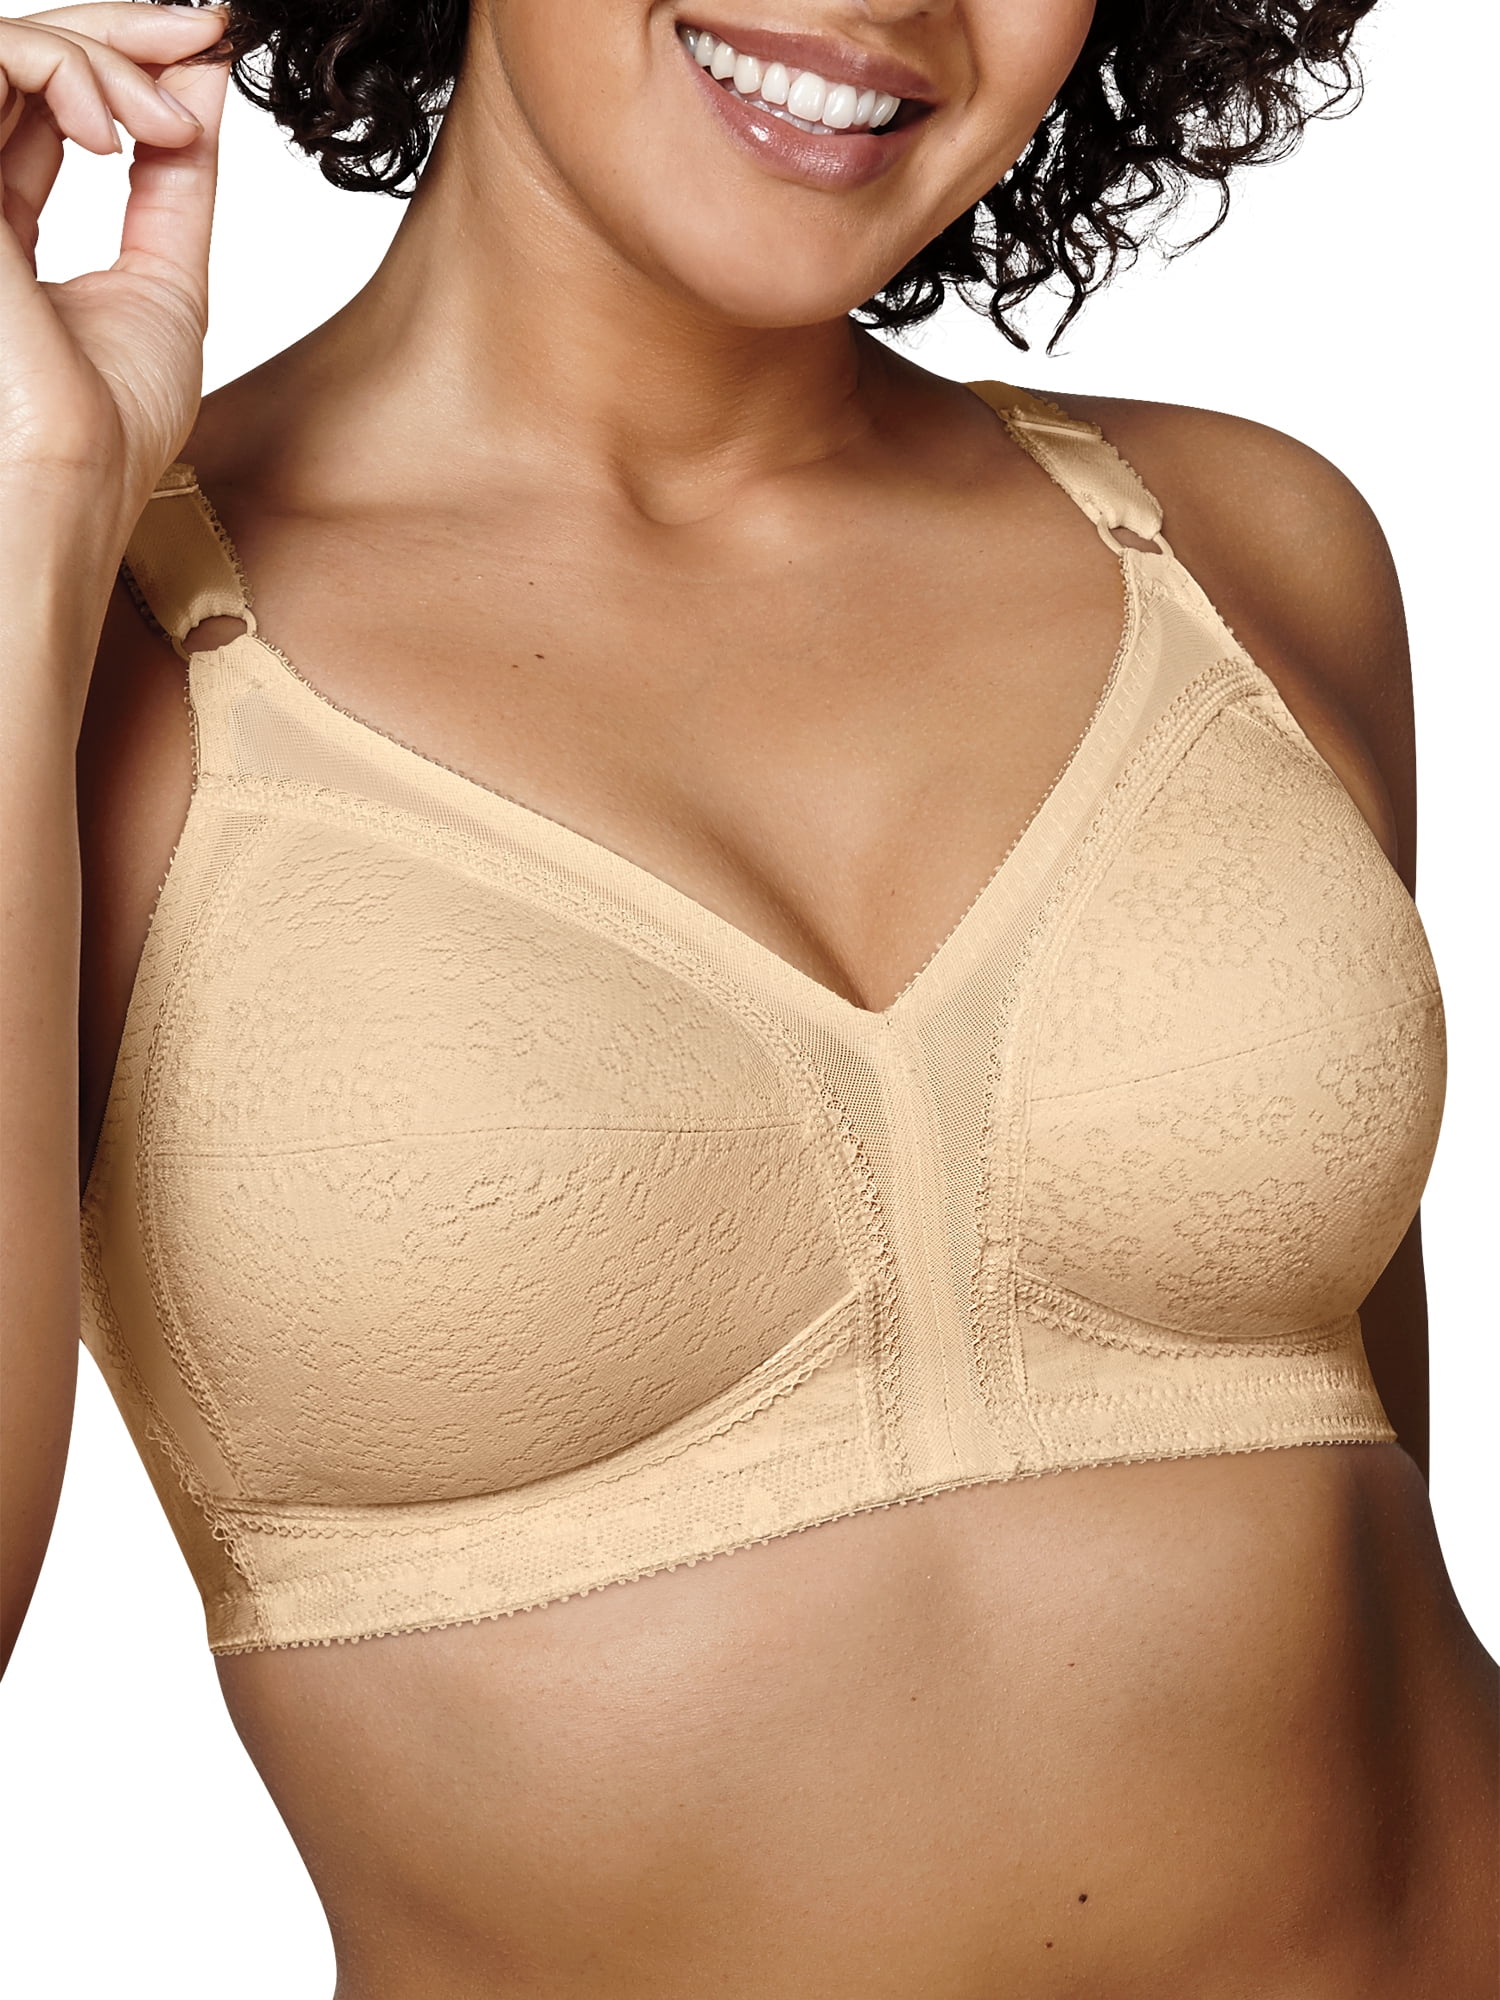 36c Bras for Women Women's Mesh Wireless Bras with Support and